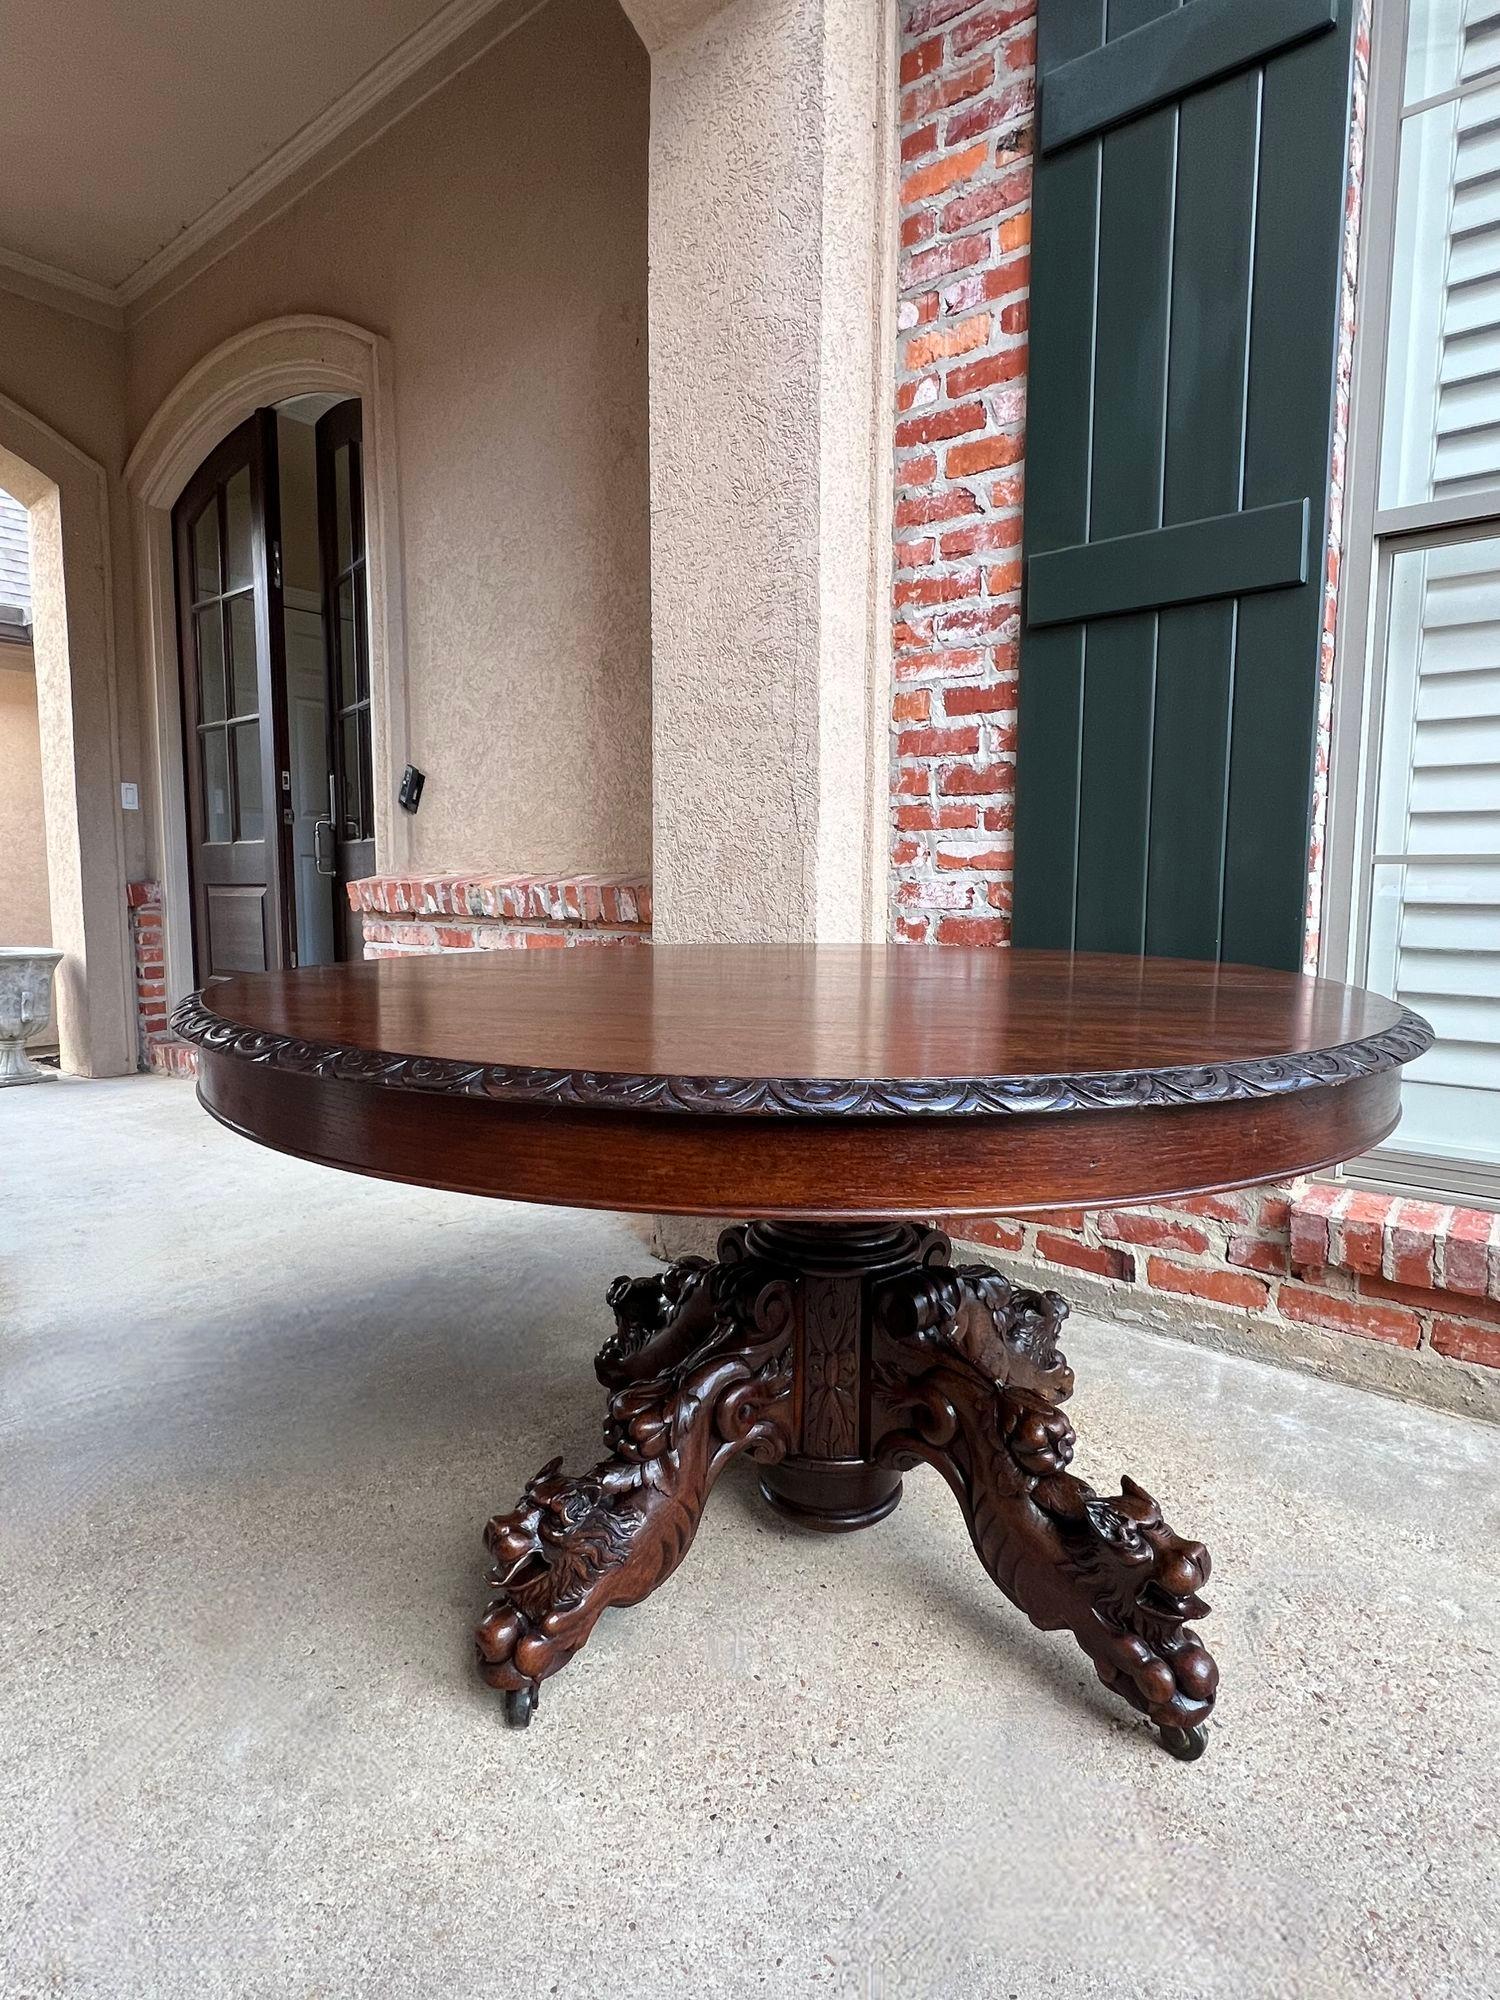 Antique French ROUND Dining Hunt Game Table Carved Oak Black Forest Pedestal.

Direct from France, a large and substantial 19th century hand carved round table!
Superior carvings, craftsmanship and artistry; the huge turned pedestal has carved